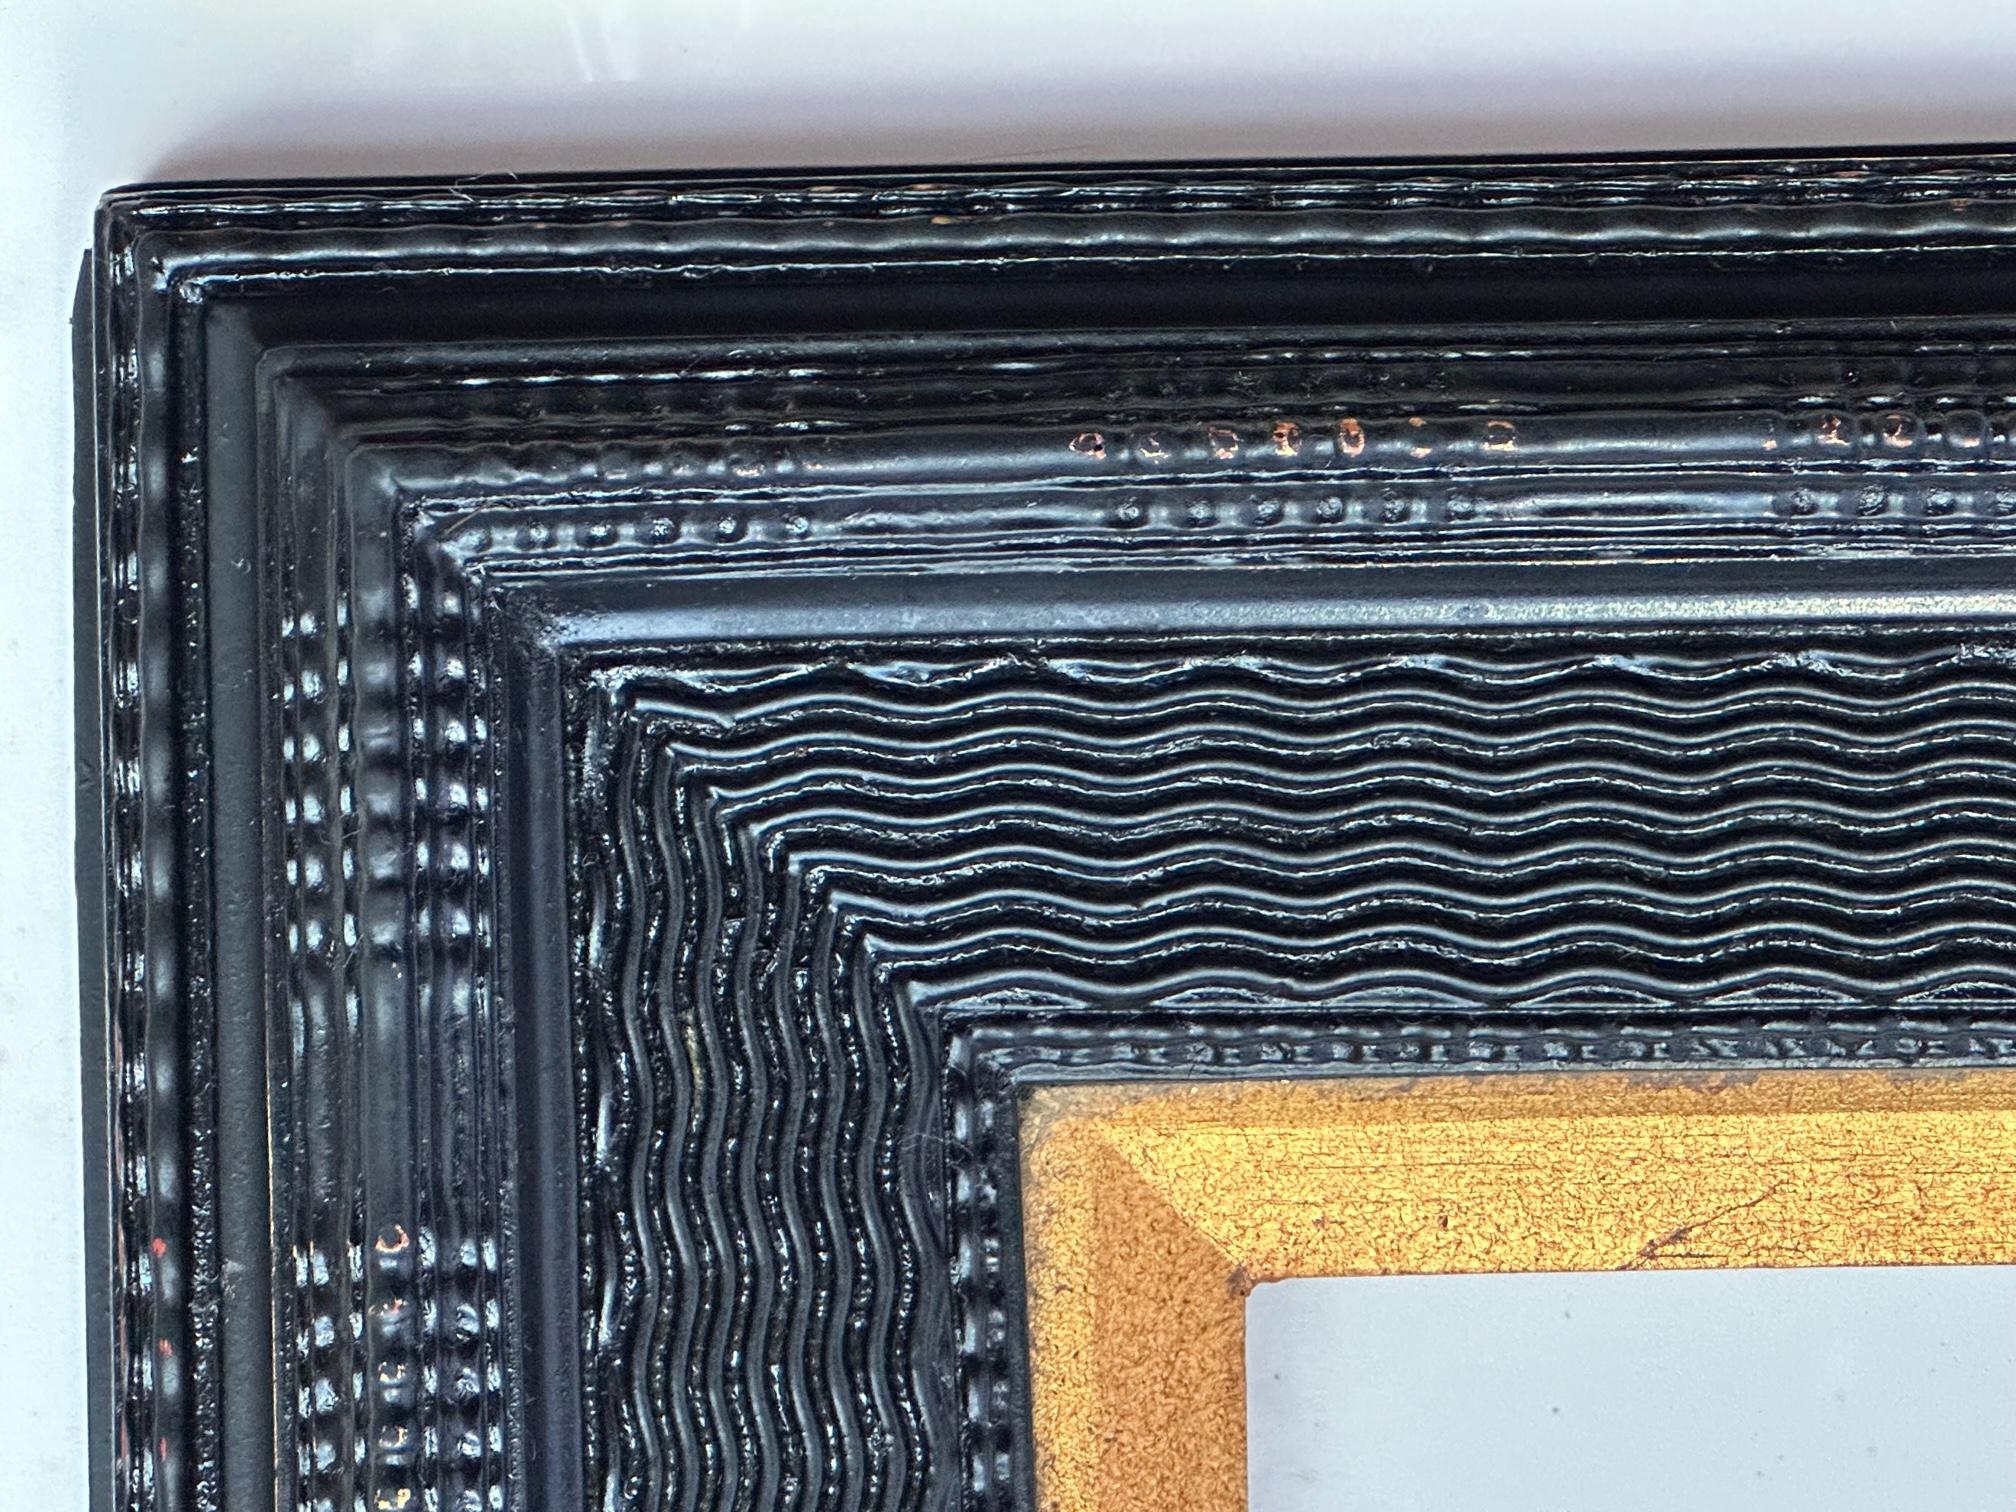 Dutch Ebonized Ripple Molded Picture Frame Early 20th Century.

Classic Dutch Old Master ebonized frame with multiple ripple molding. The depth and detail is exceptional. The molding is highlighted by a ripple panel pattern with a finish that